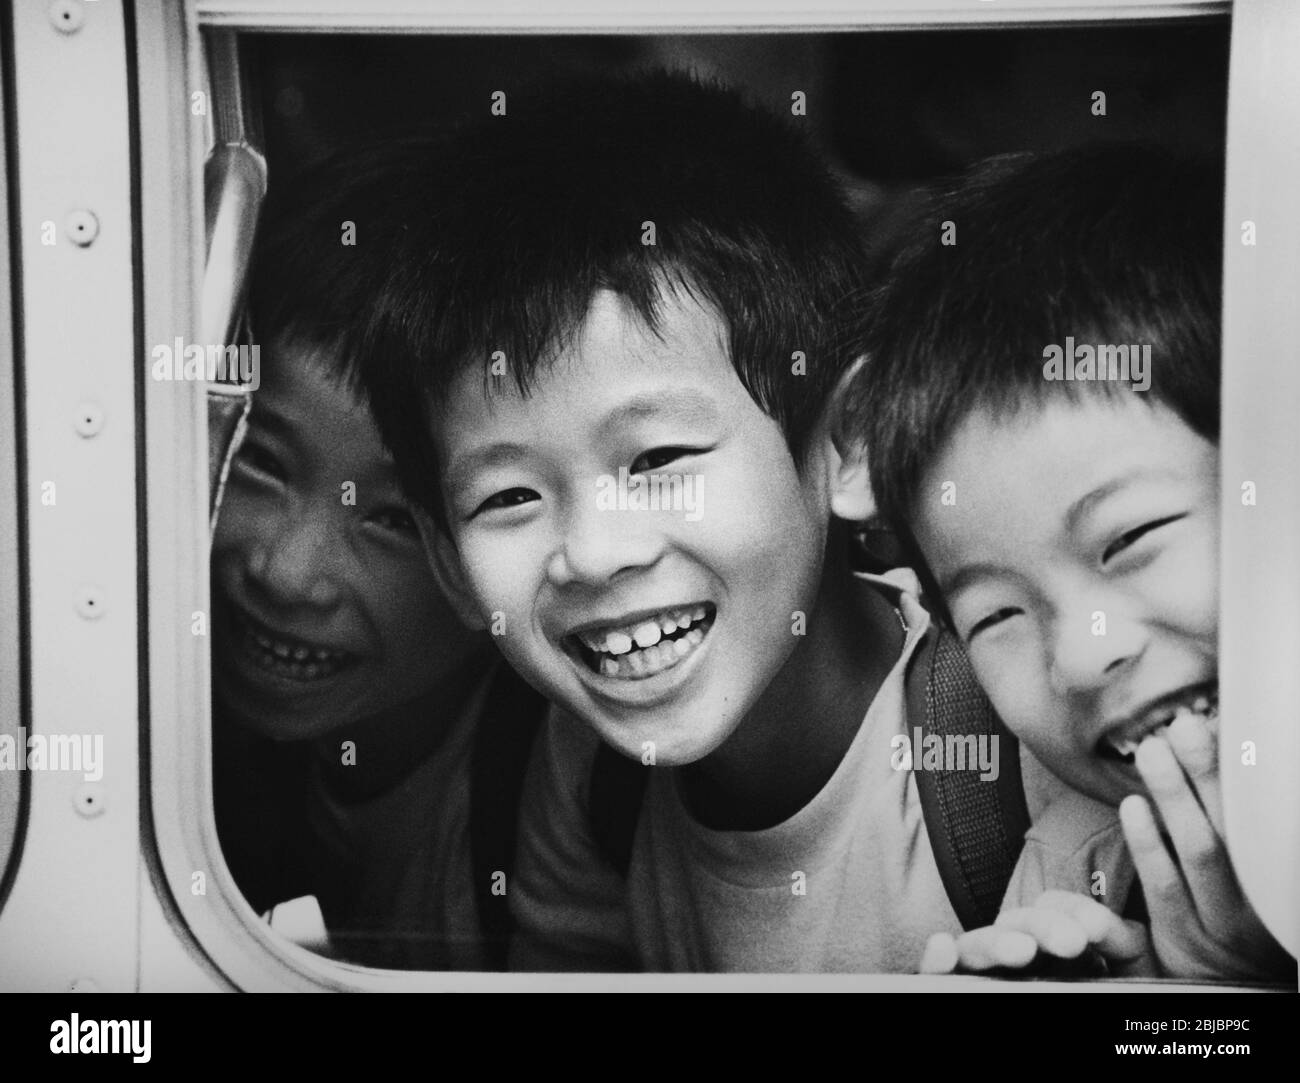 Hong Kong October 1986 Children on school bus, Waterloo Road, Ho Man Tin. The picture is is part of a collection of photographs taken in Hong Kong between September and November, 1986. They represent a snapshot of Daily Life in the Crown Colony eleven years before sovereignty was transferred back to mainland China. Photograph by Howard Walker / Alamy. Stock Photo